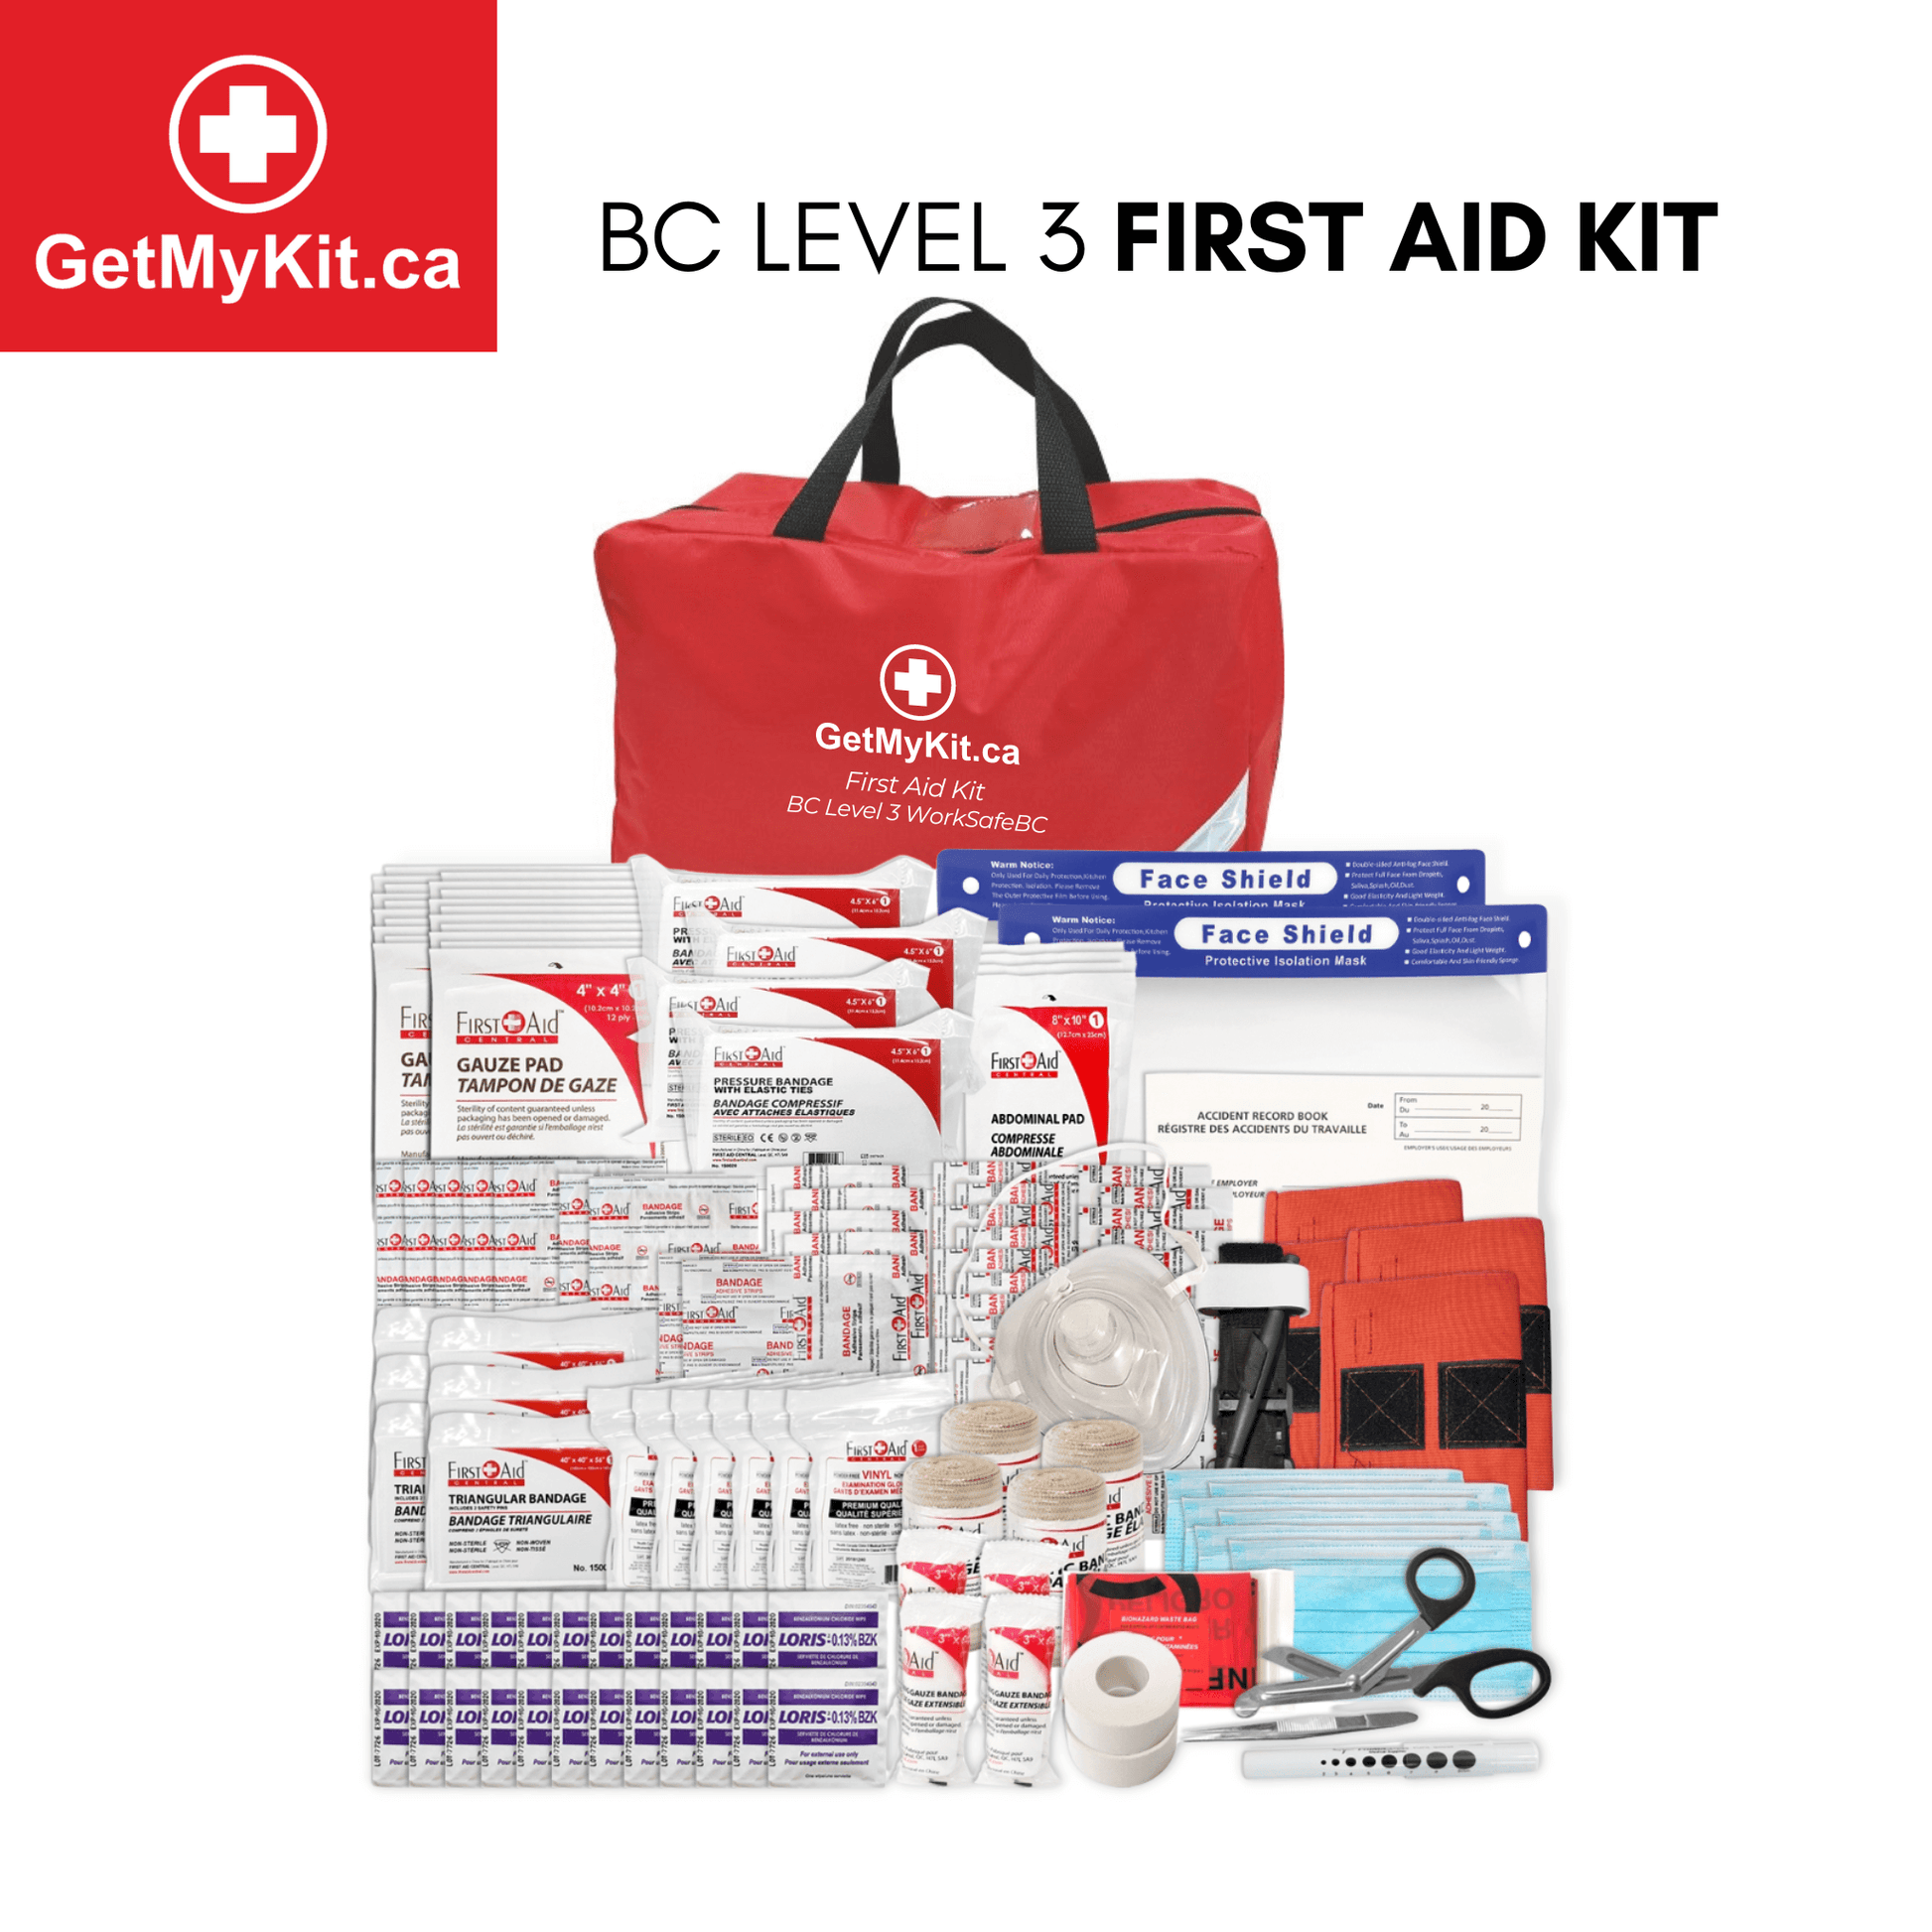 BC Level 3 First Aid Kit